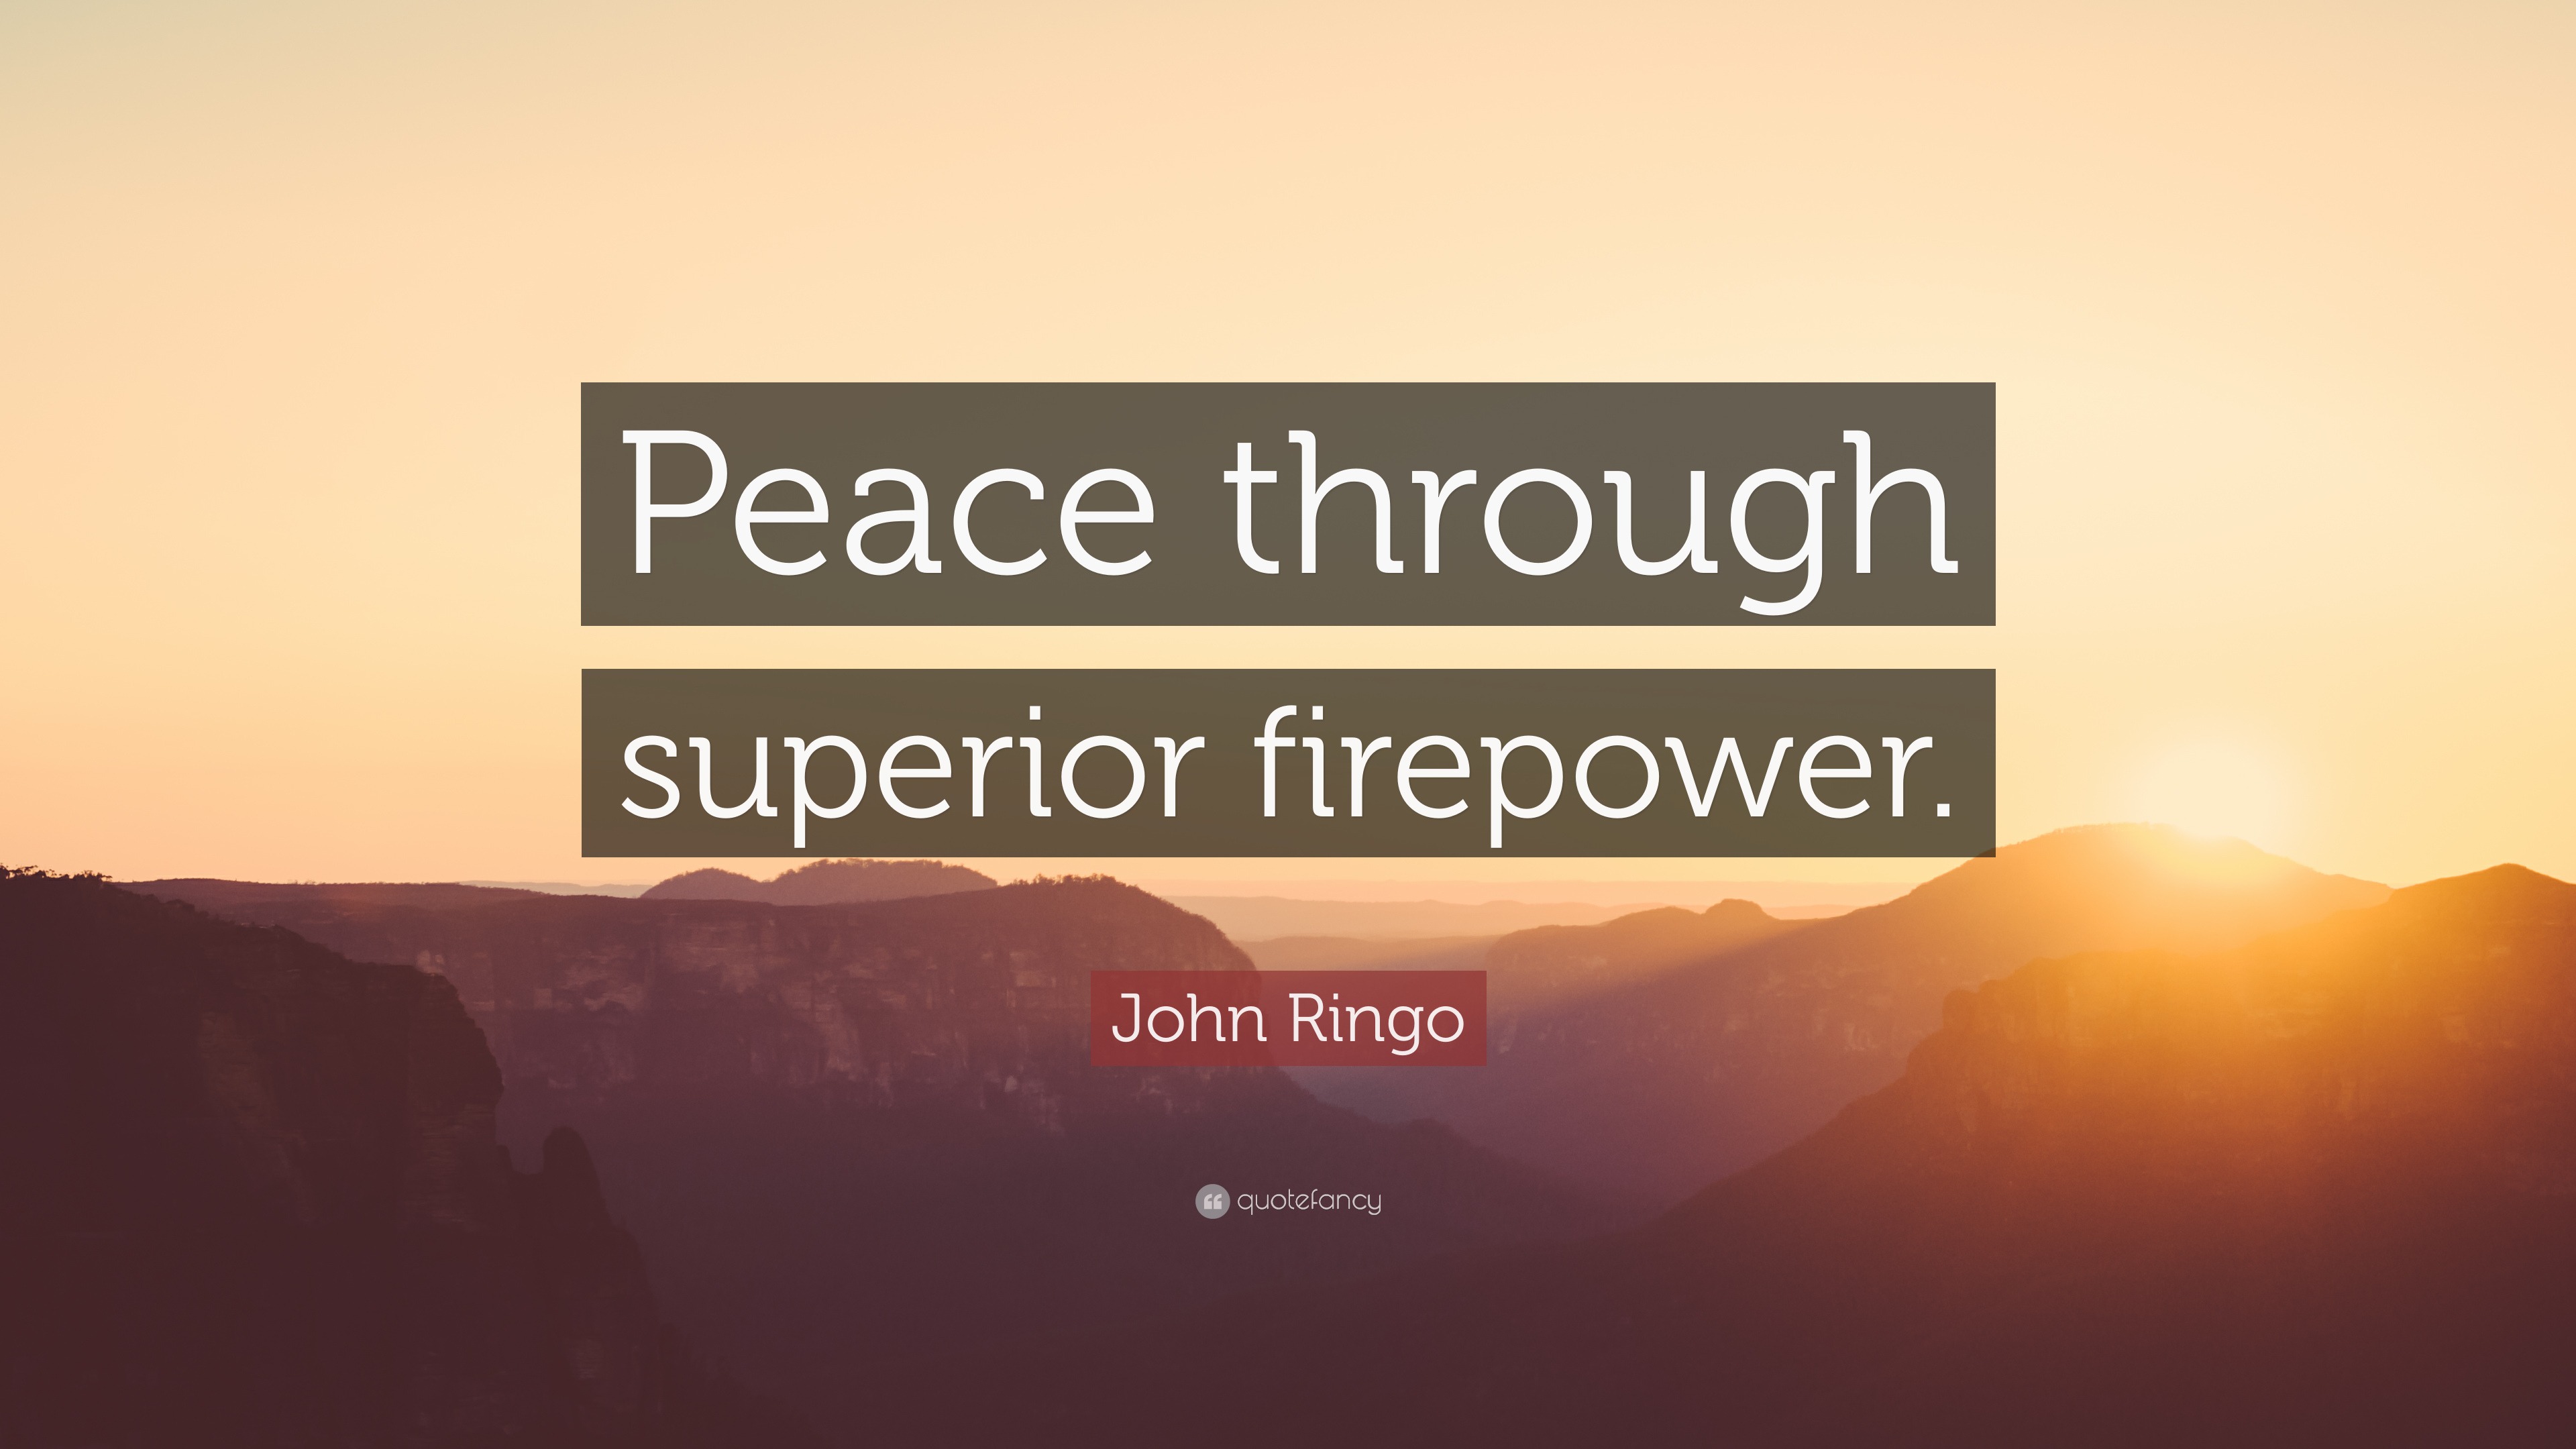 John Ringo Quote: "Peace through superior firepower." (7 wallpapers) - Quotefancy